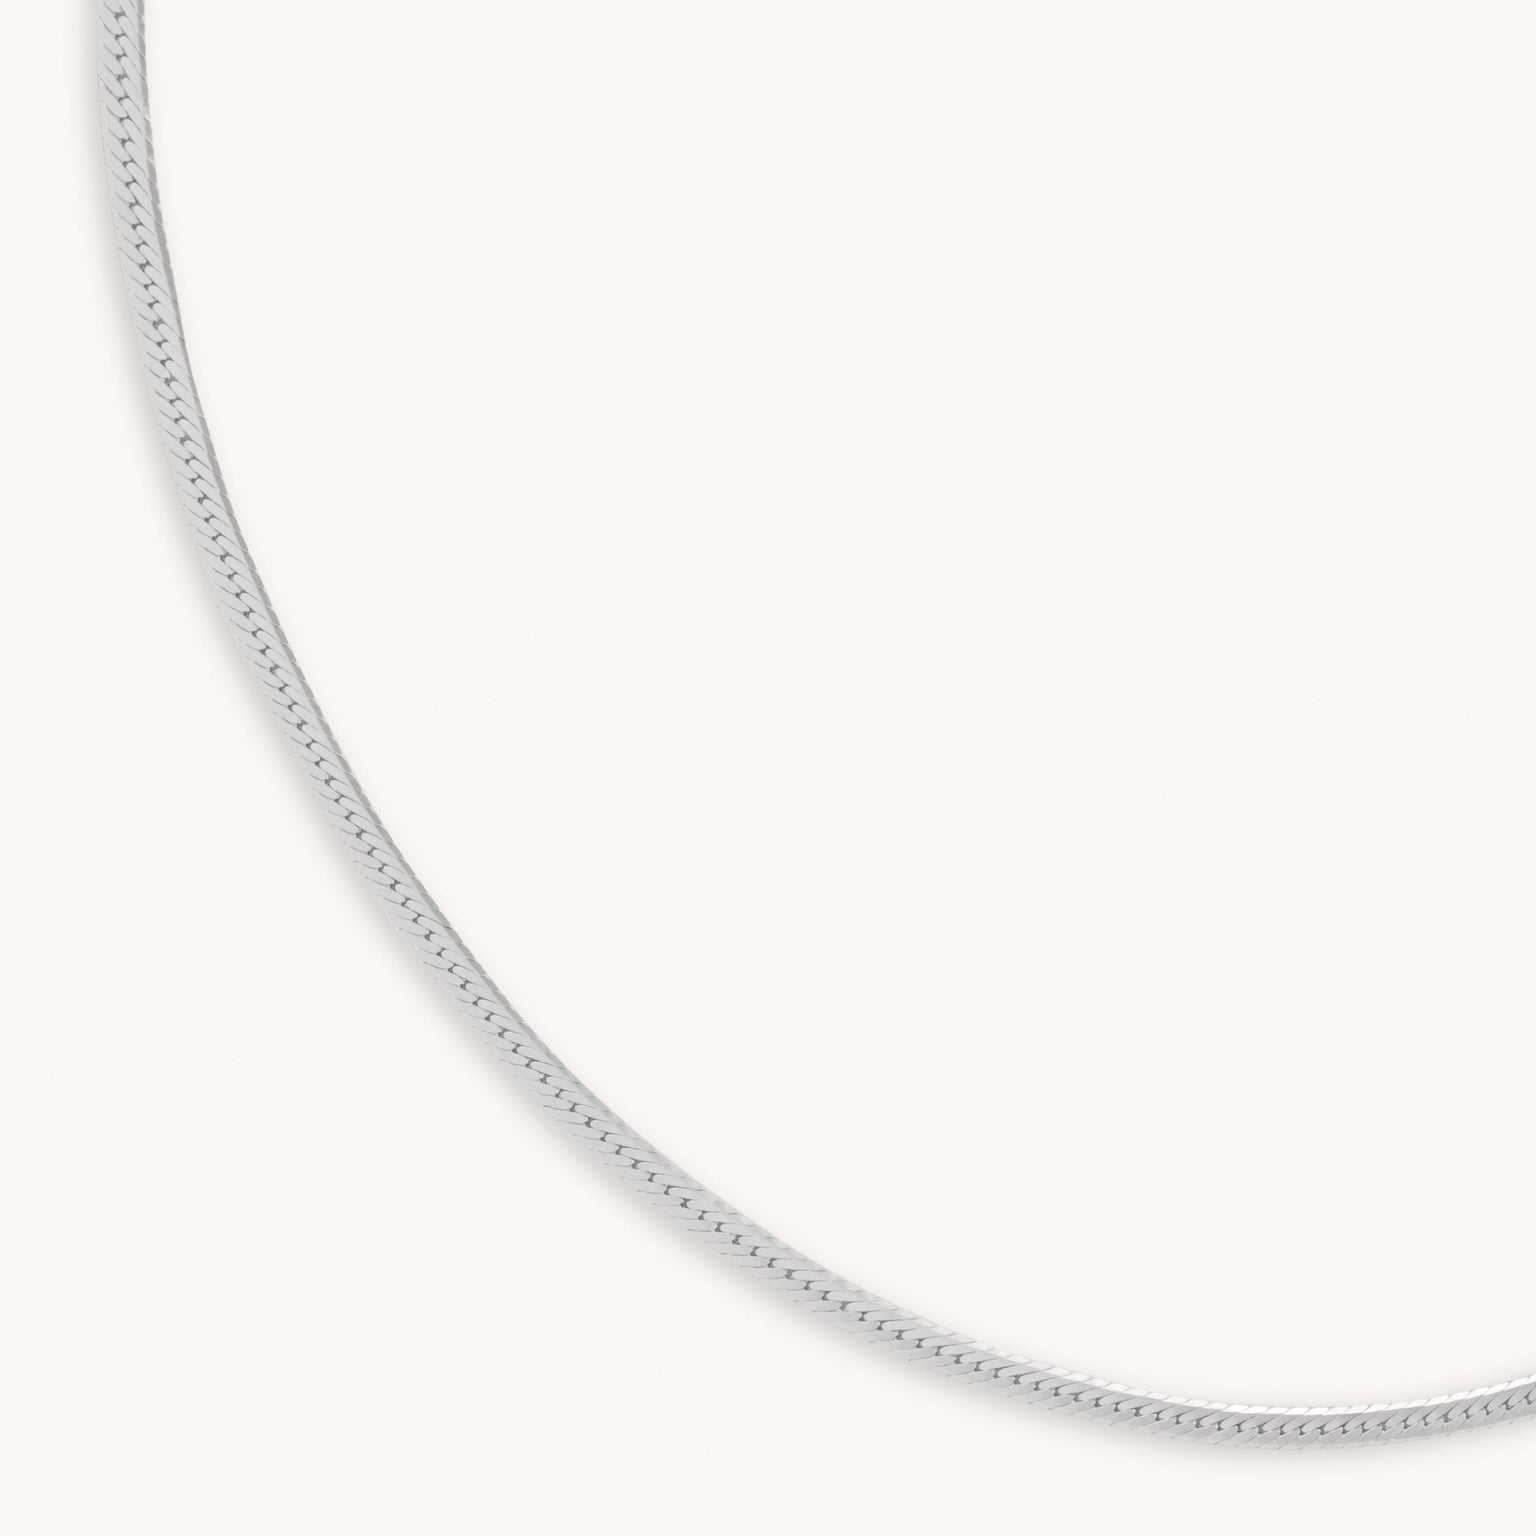 Snake Chain Necklace - Sterling Silver